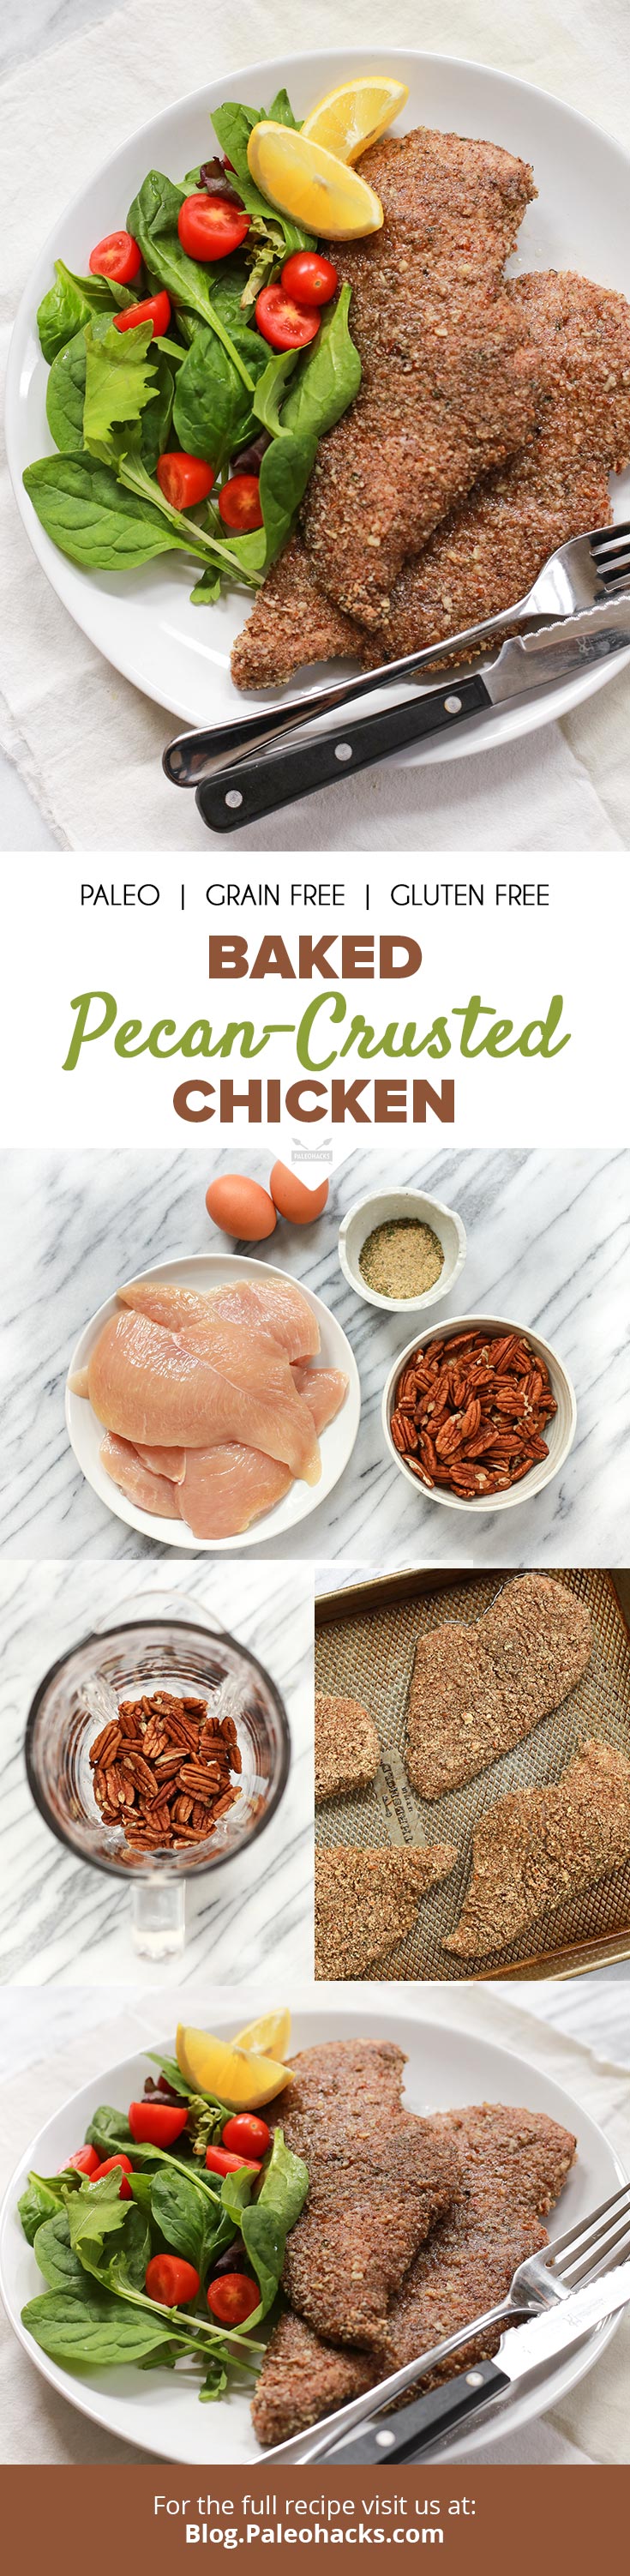 Thinly sliced chicken breasts get coated in a seasoned pecan mix and baked for a crispy chicken dinner.